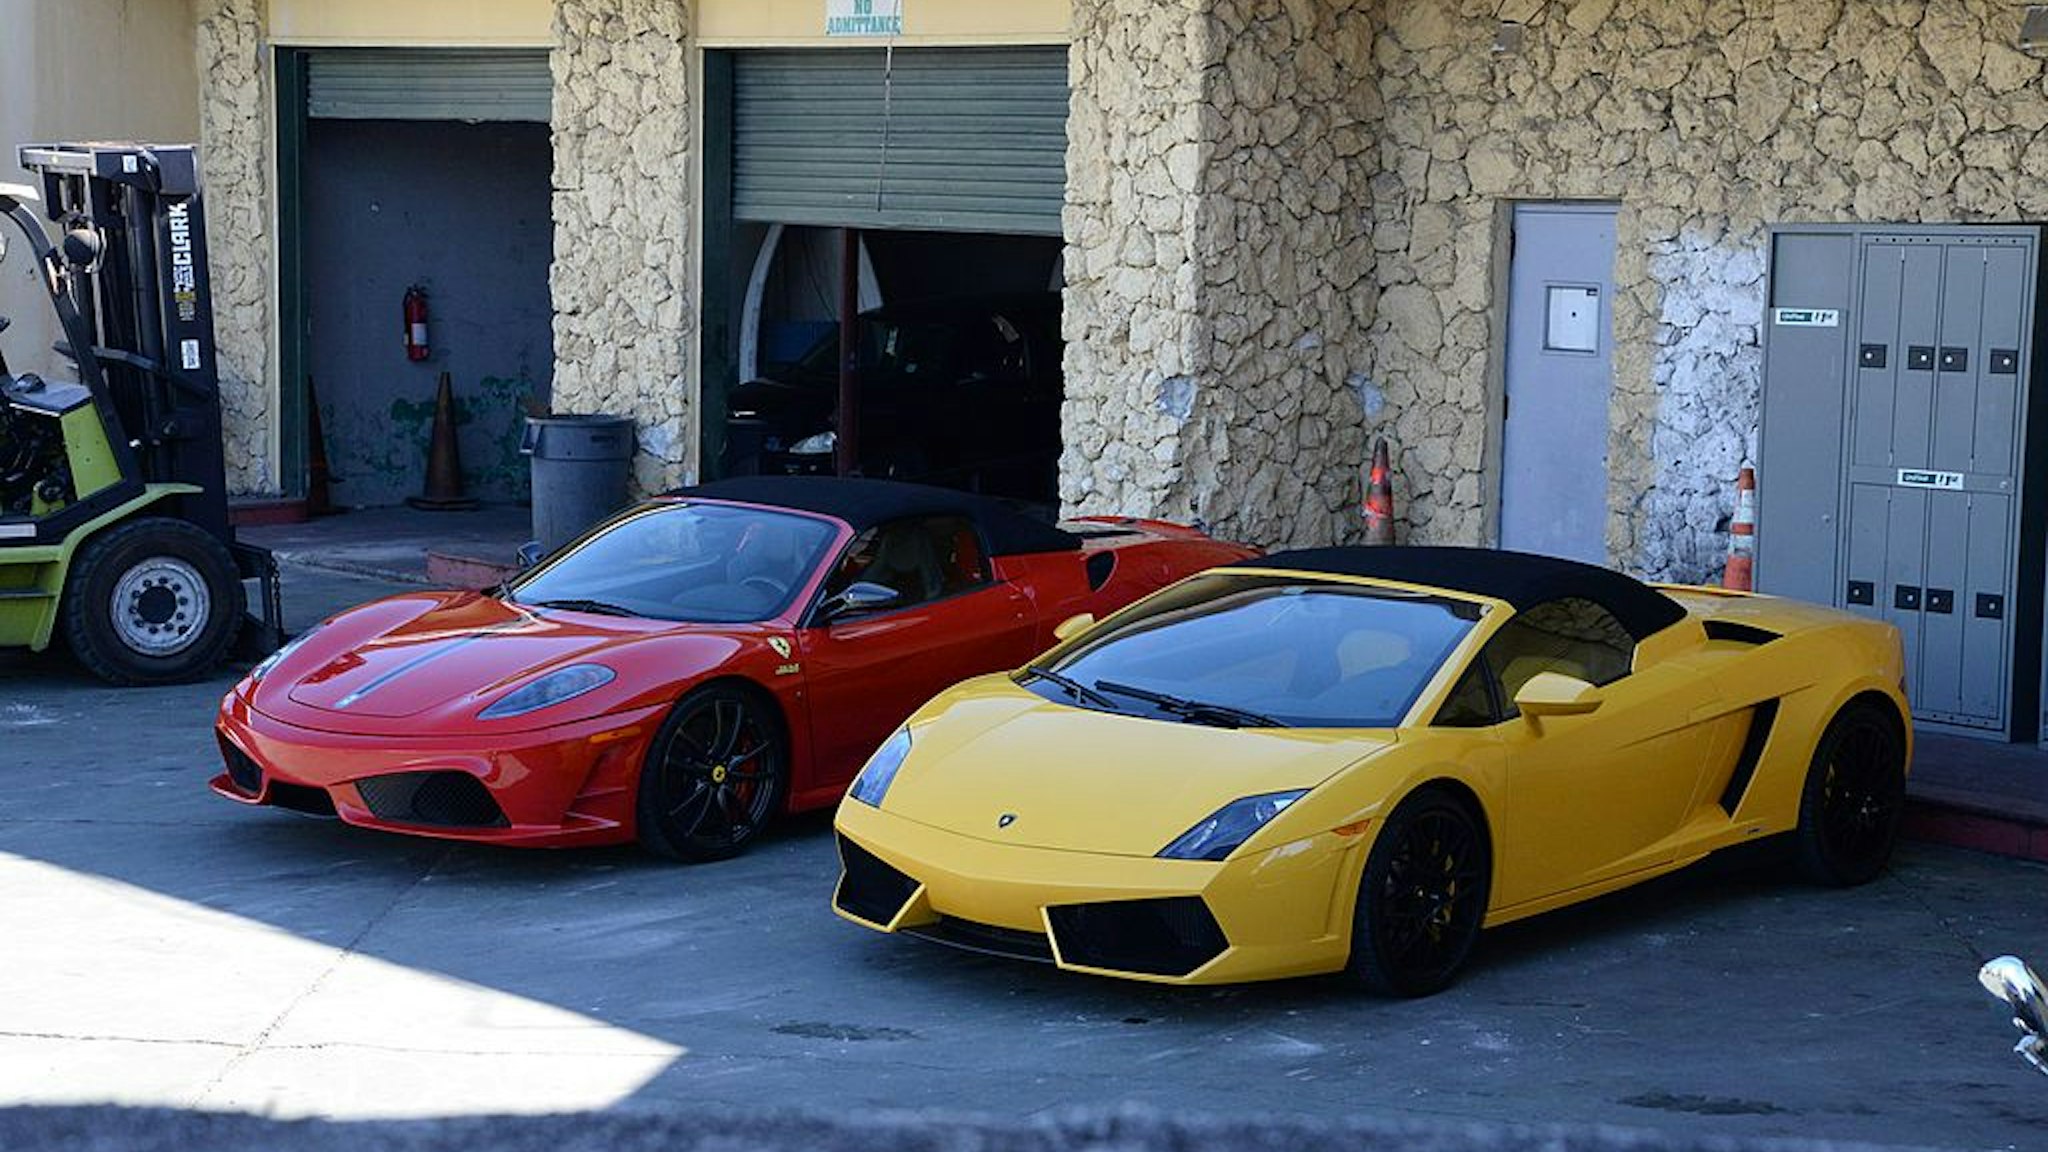 MIAMI BEACH, FL - JANUARY 23: Ferrari and Lamborghini cars believed to have been used by Justin Bieber during his road racing before he was arrested sit in an impound lot on January 23, 2014 in Miami Beach, Florida. Justin Bieber was charged with drunken driving, resisting arrest and driving without a valid license after Miami Beach Police found the pop star street racing on Thursday morning. (Photo by Manny Hernandez/Getty Images)